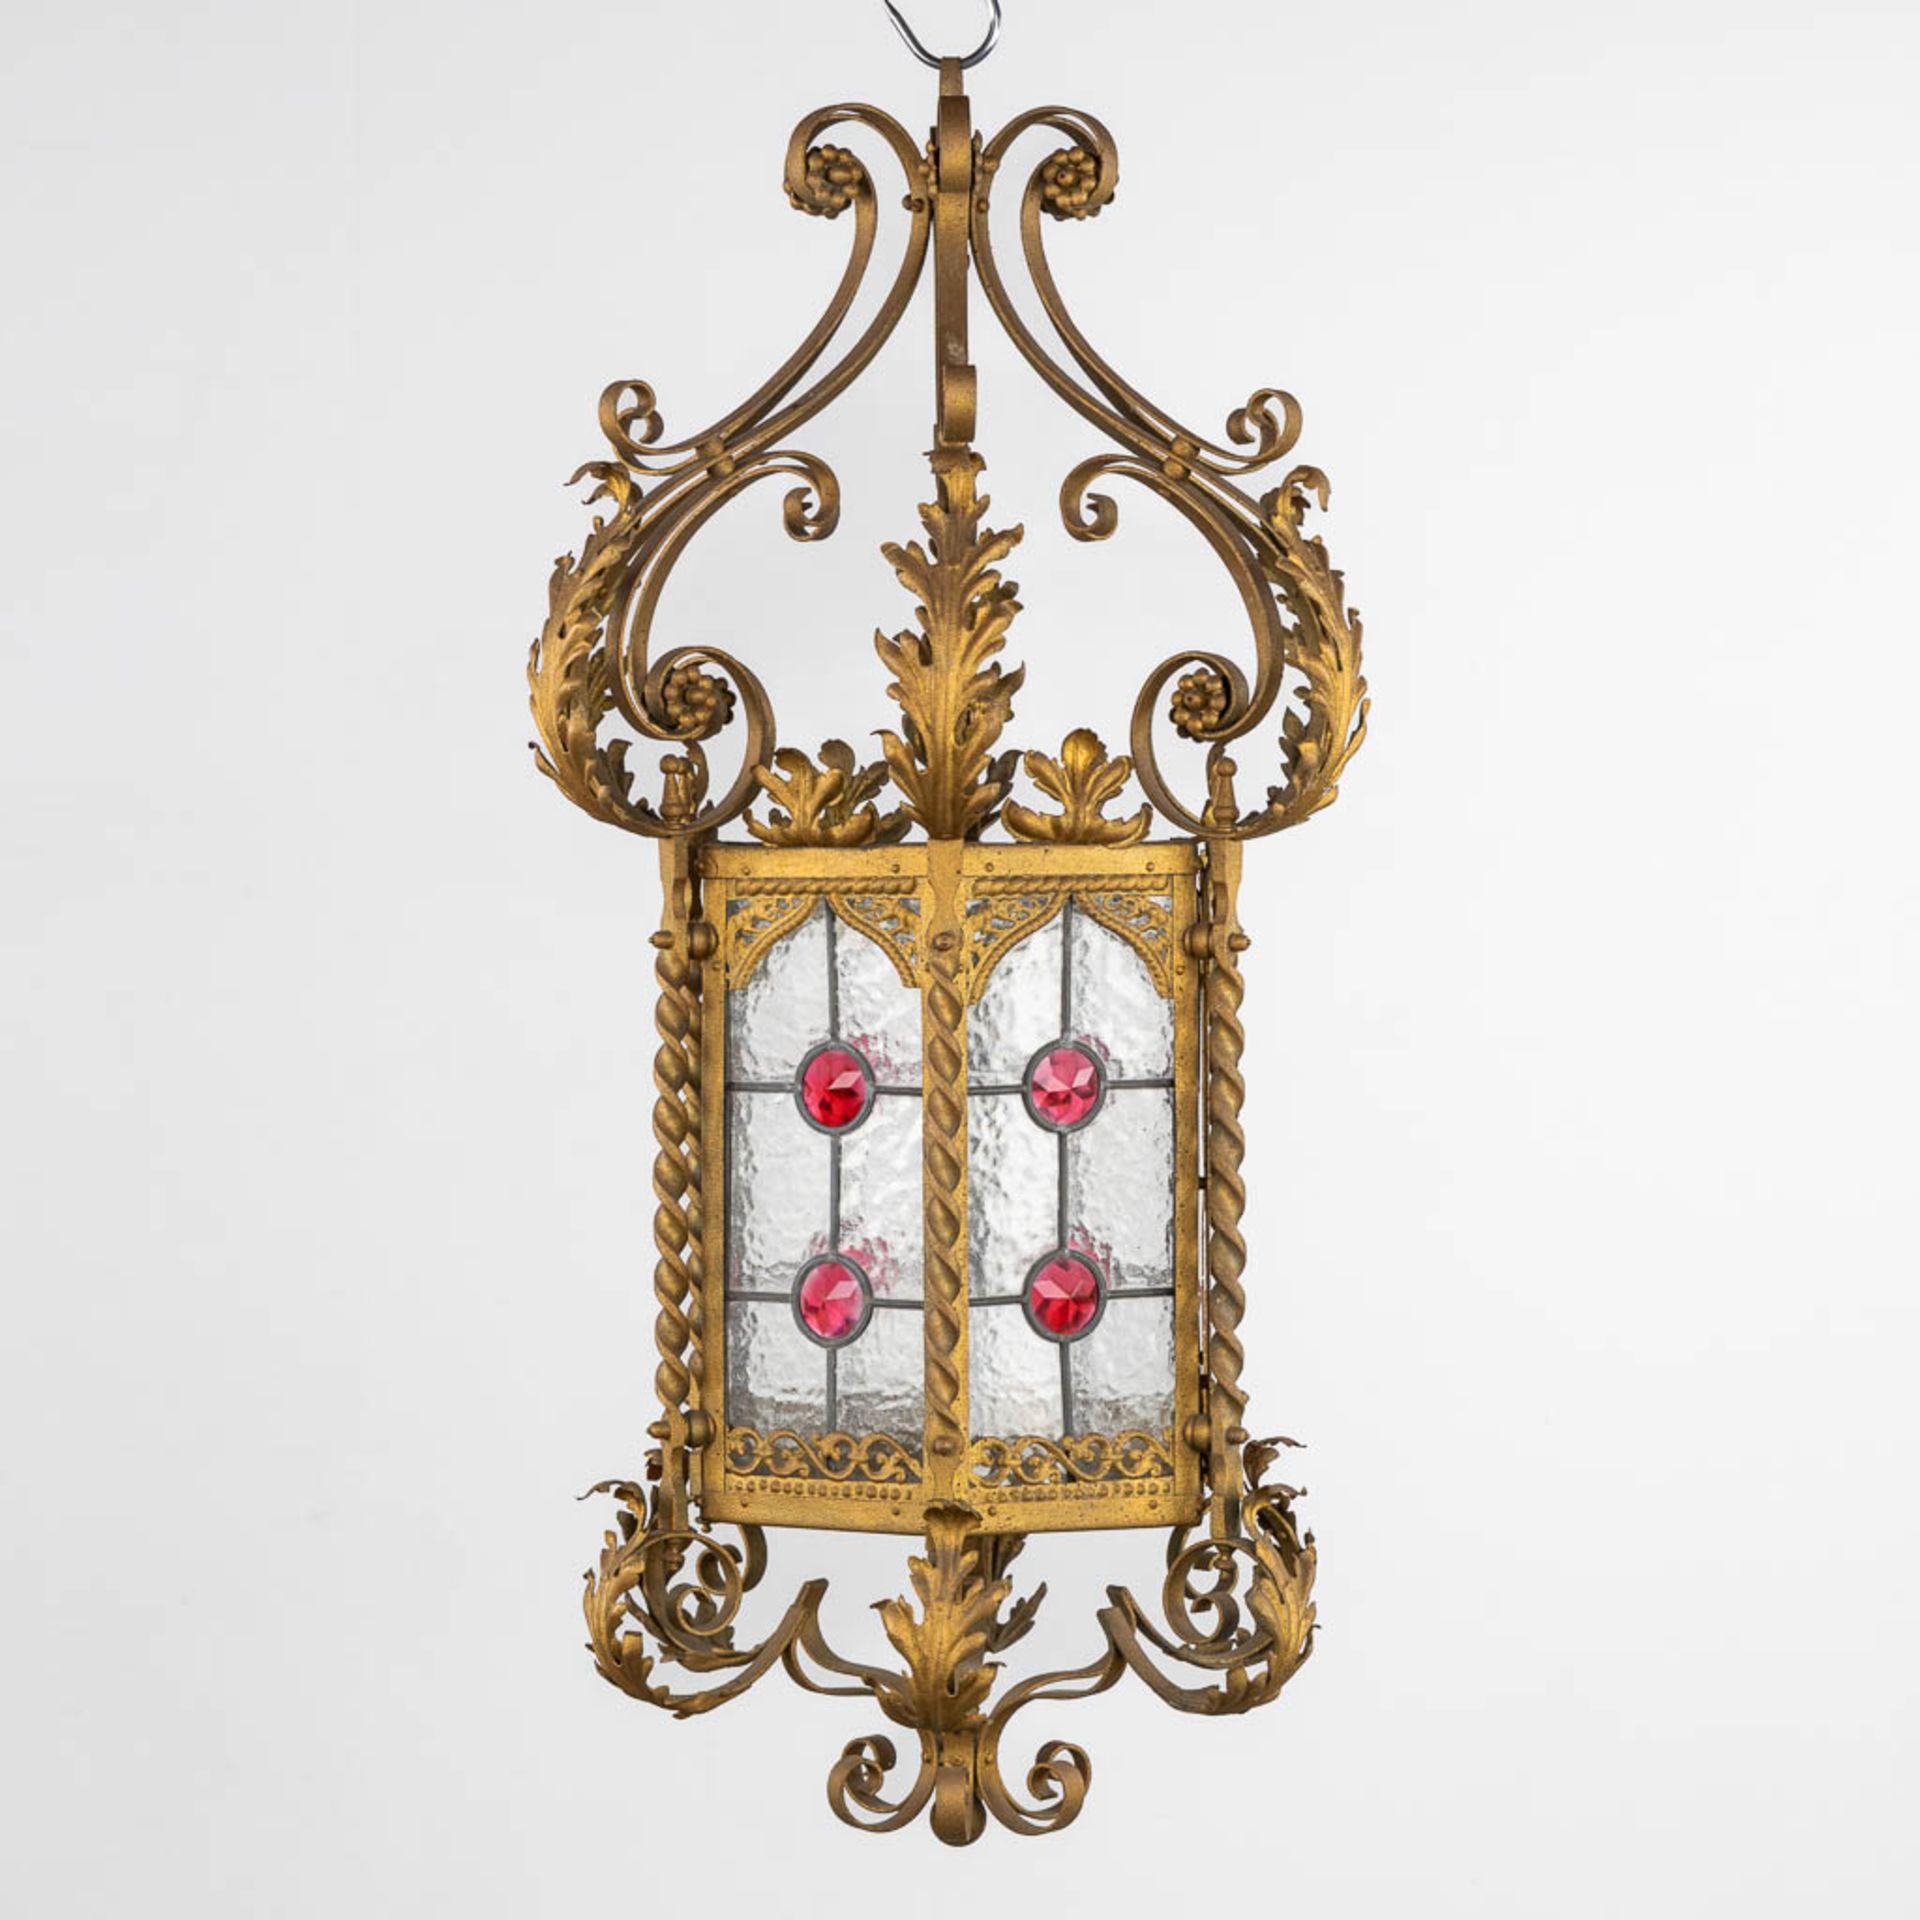 A decorative Lantern, gilt metal and stained glass. (H:96 x D:48 cm)